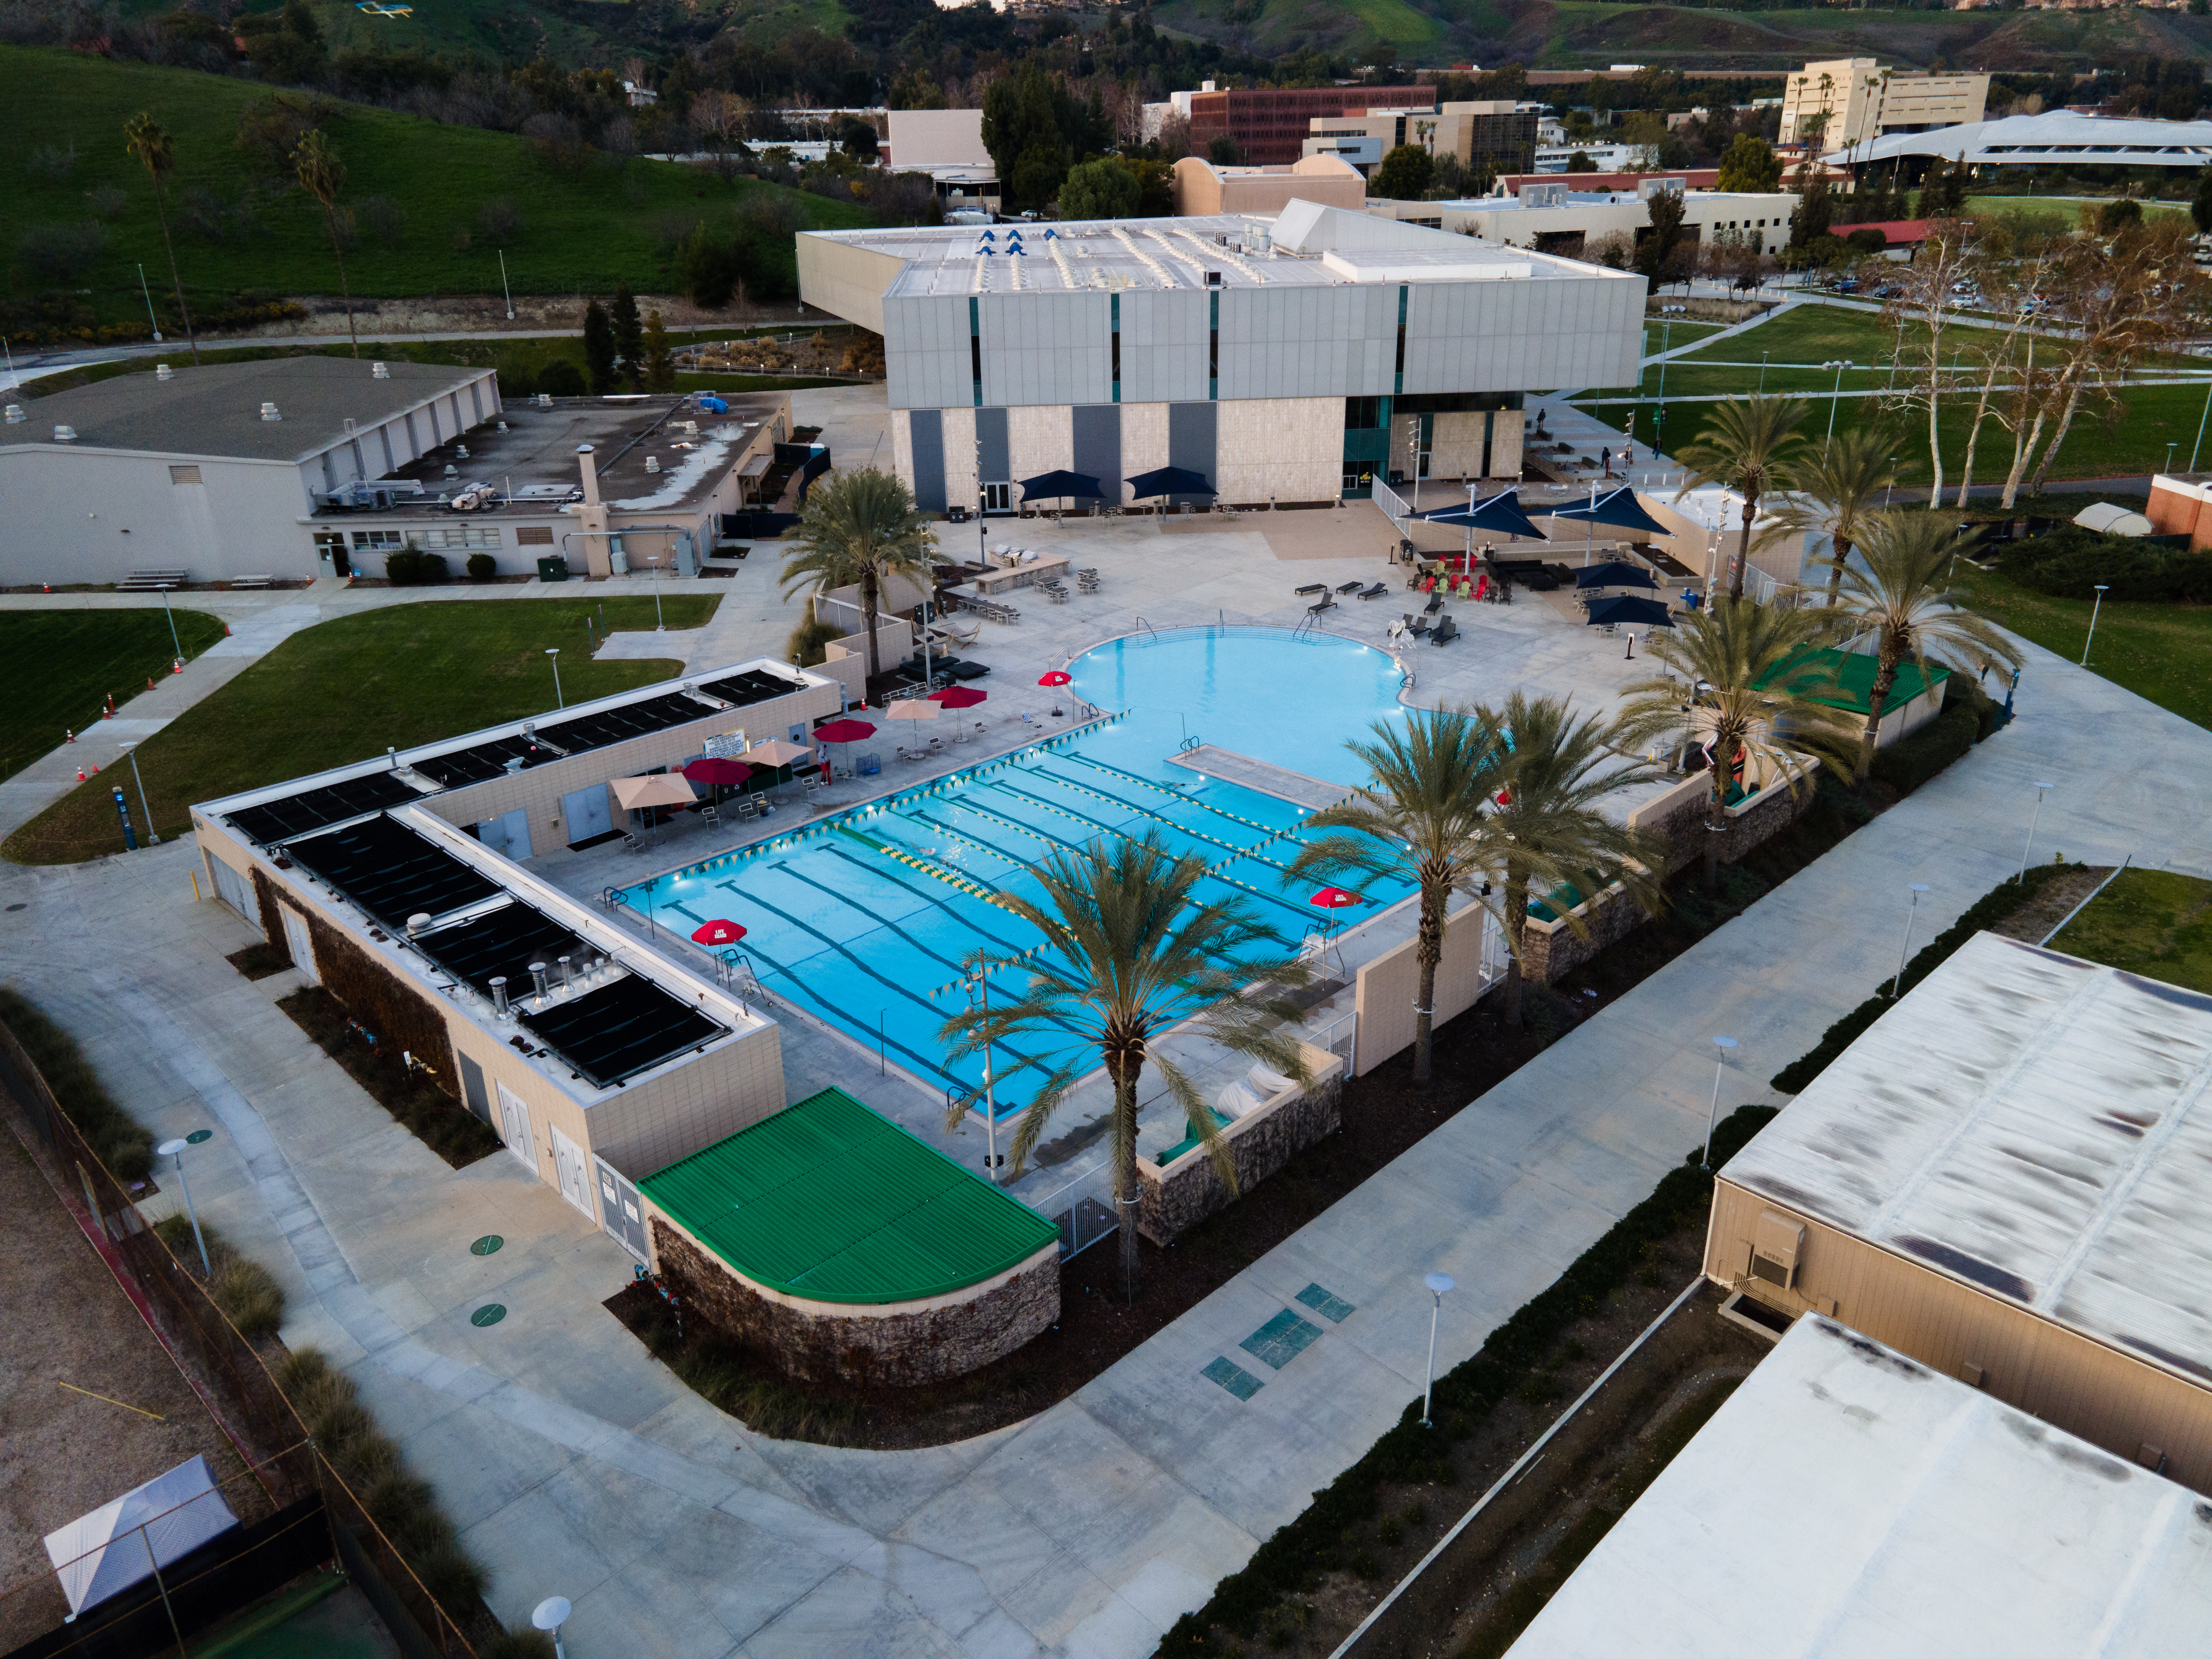 Overhead view of the pool